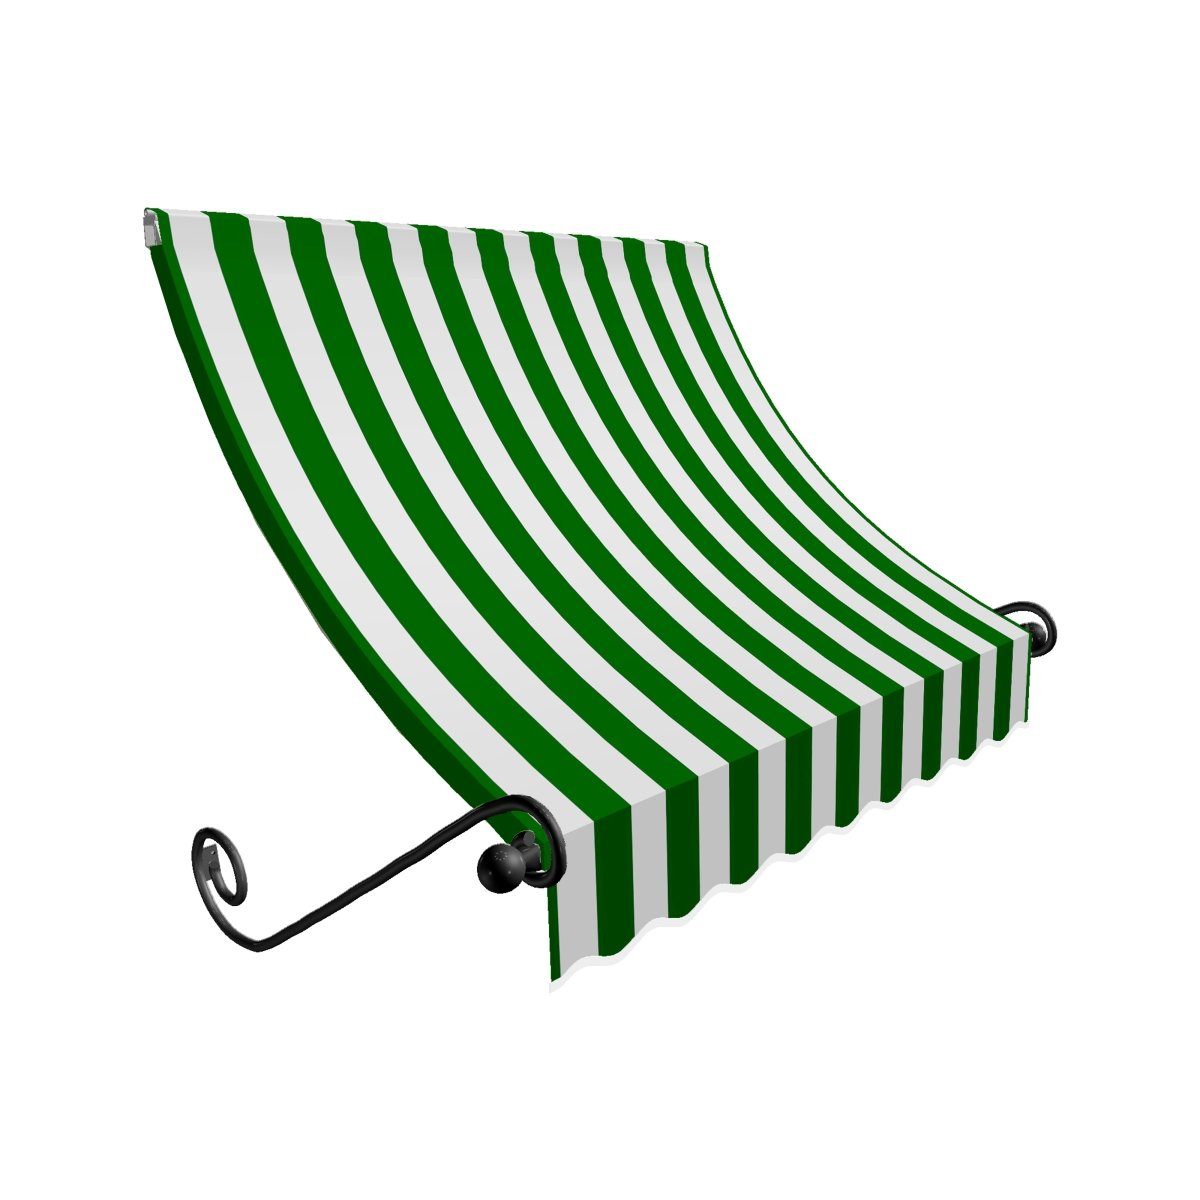 Ech23-us-6fw 6.38 Ft. Charleston Window & Entry Awning, Forest Green & White - 24 X 36 In.